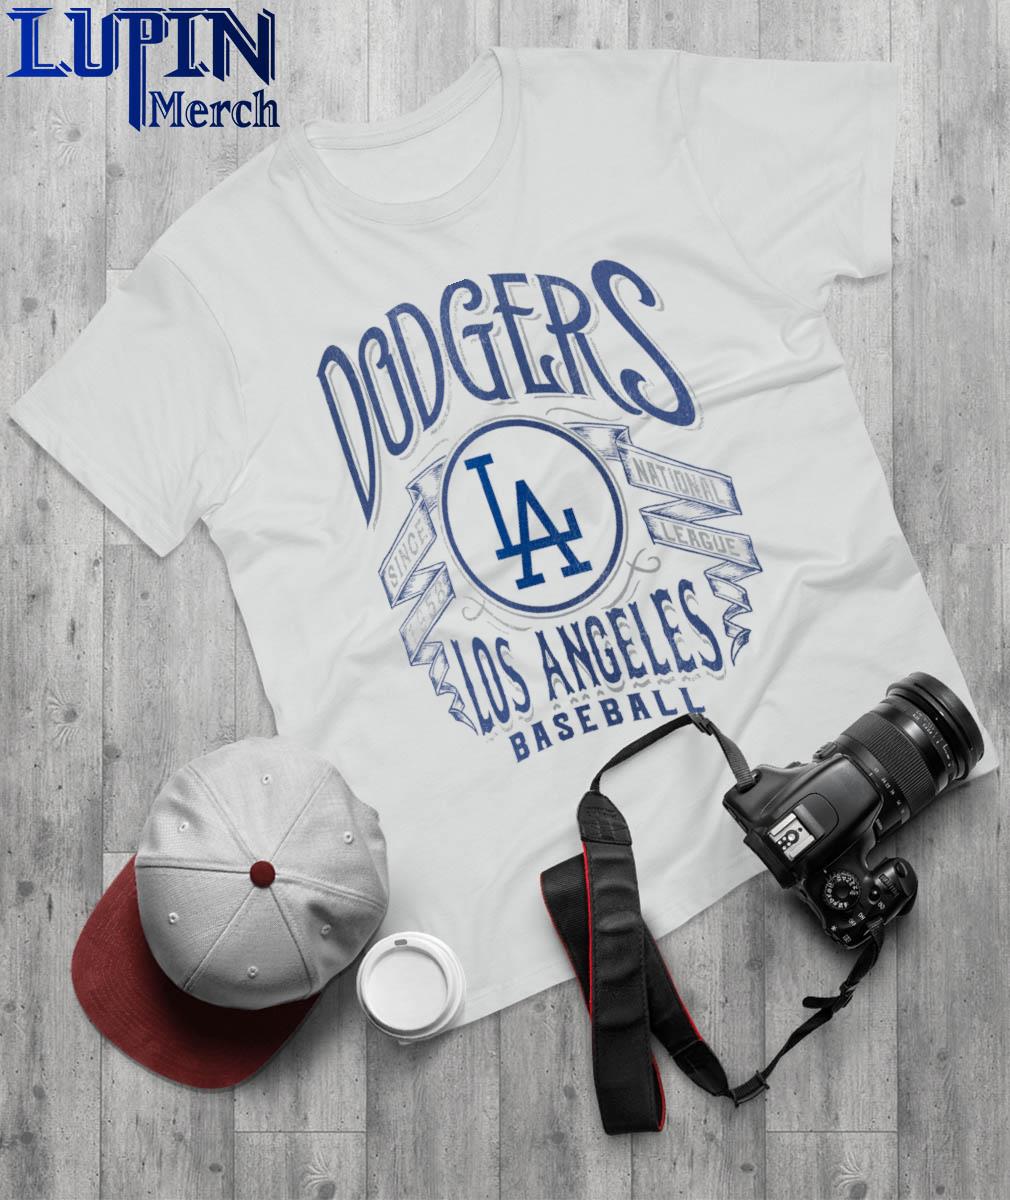 Official kansas City Royals Darius Rucker Collection Distressed